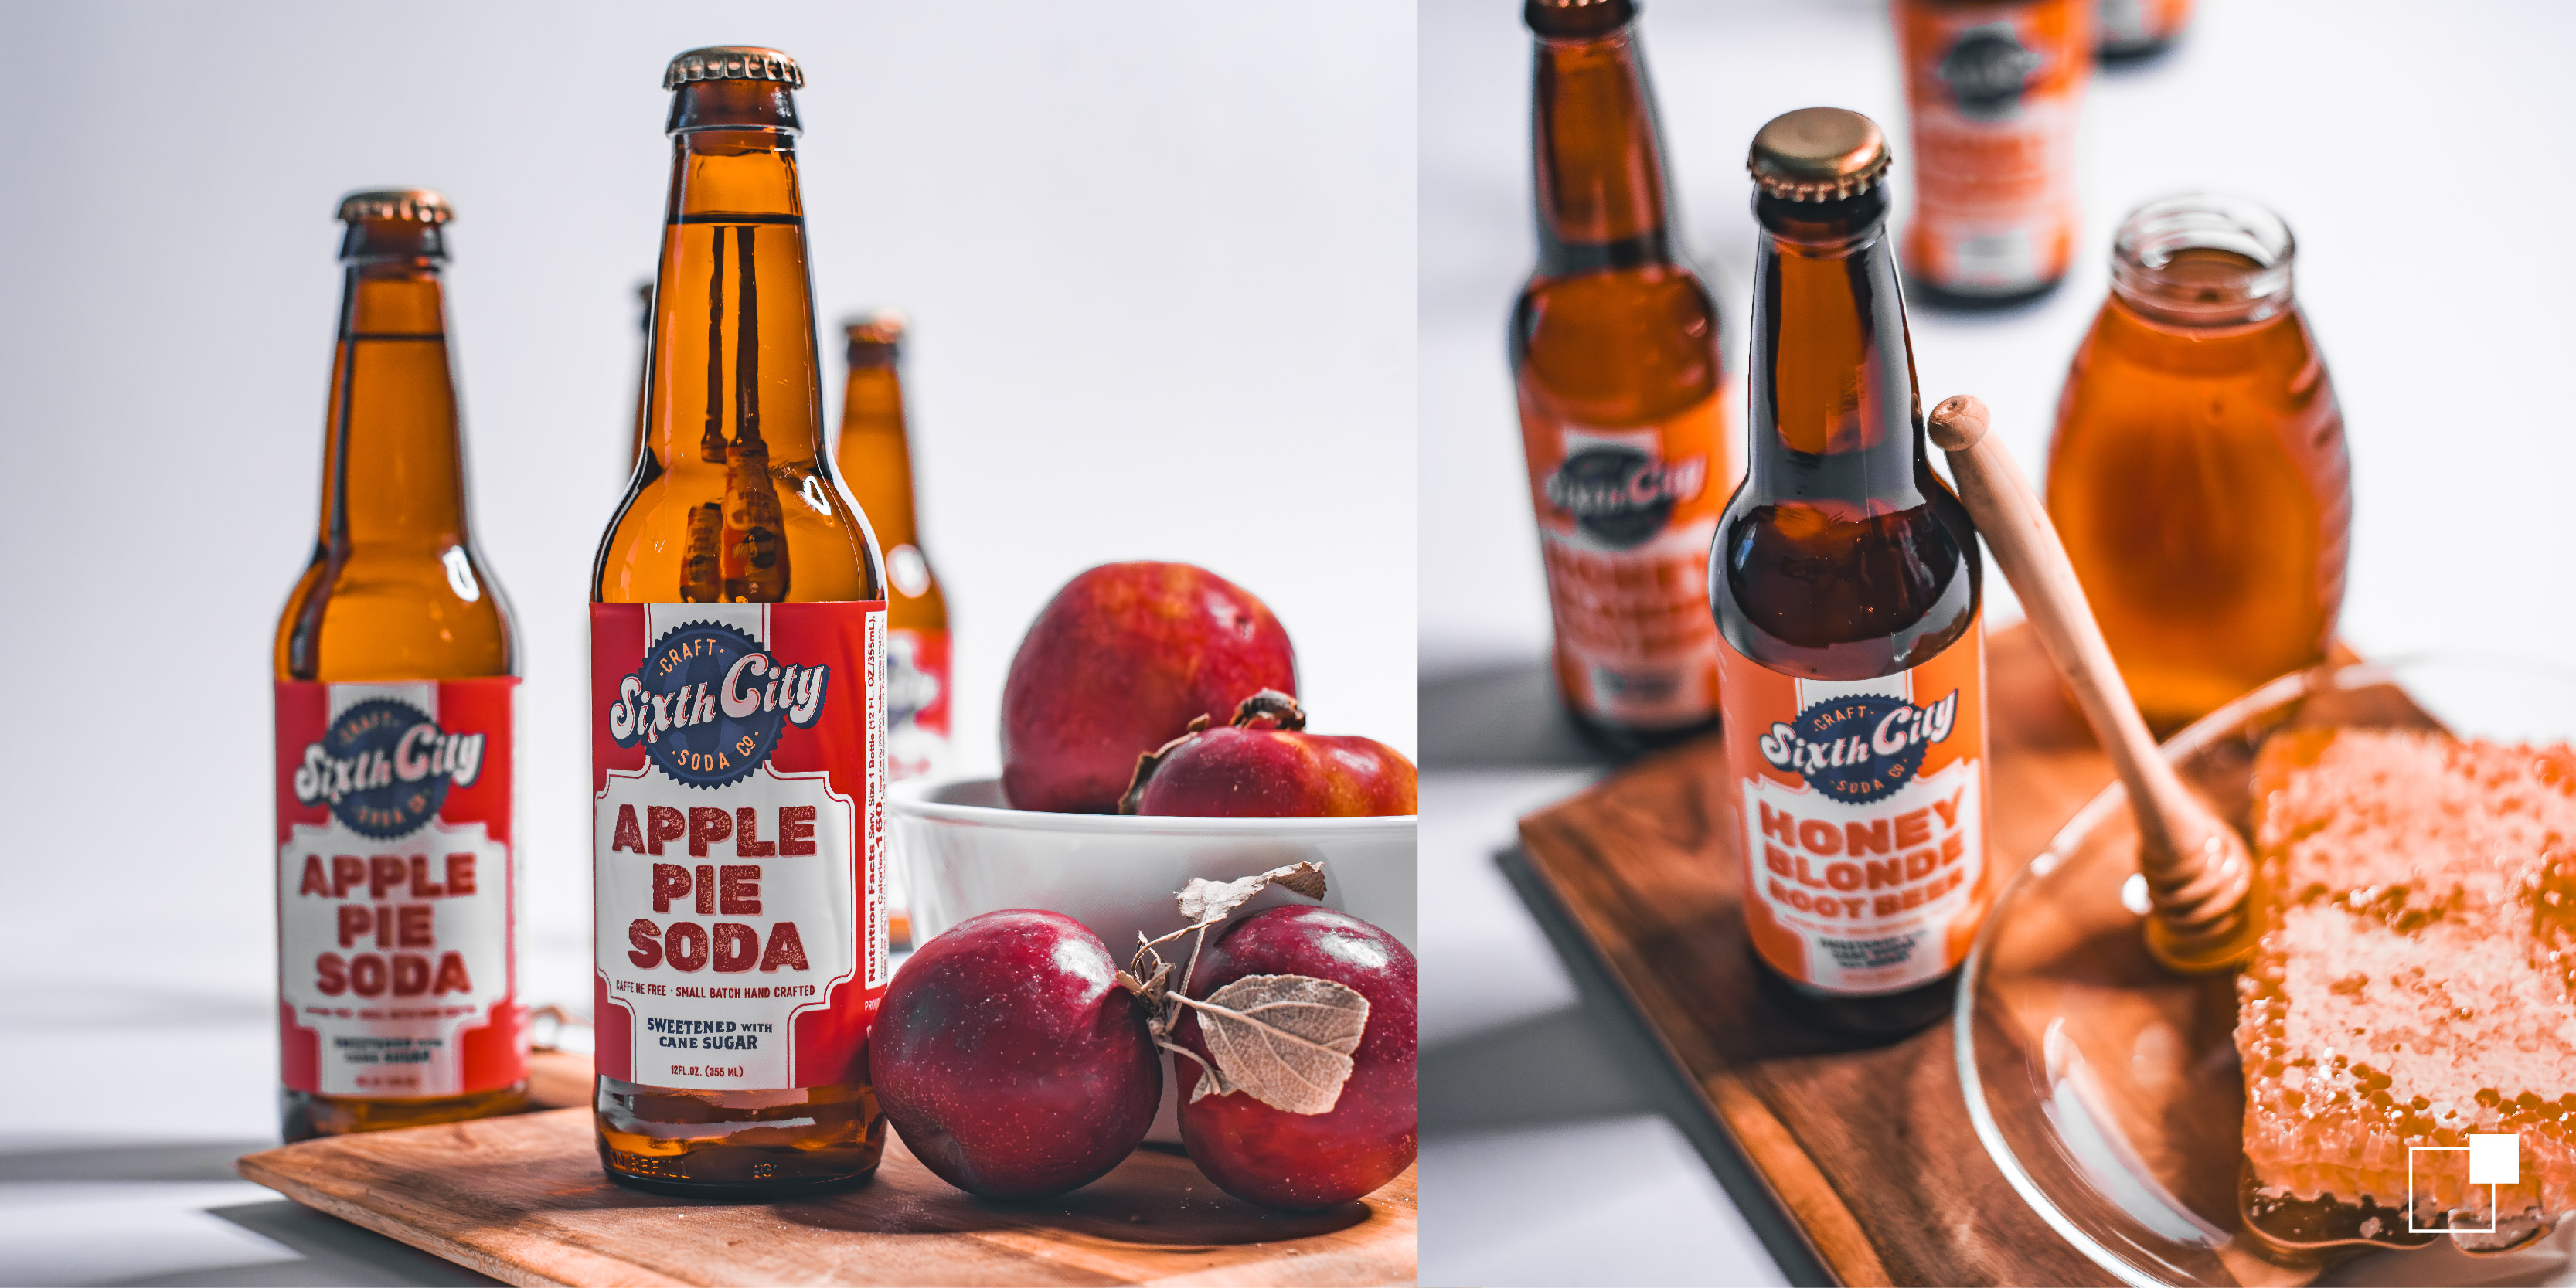 Sixth City Soda bottles next to apples and maple syrup